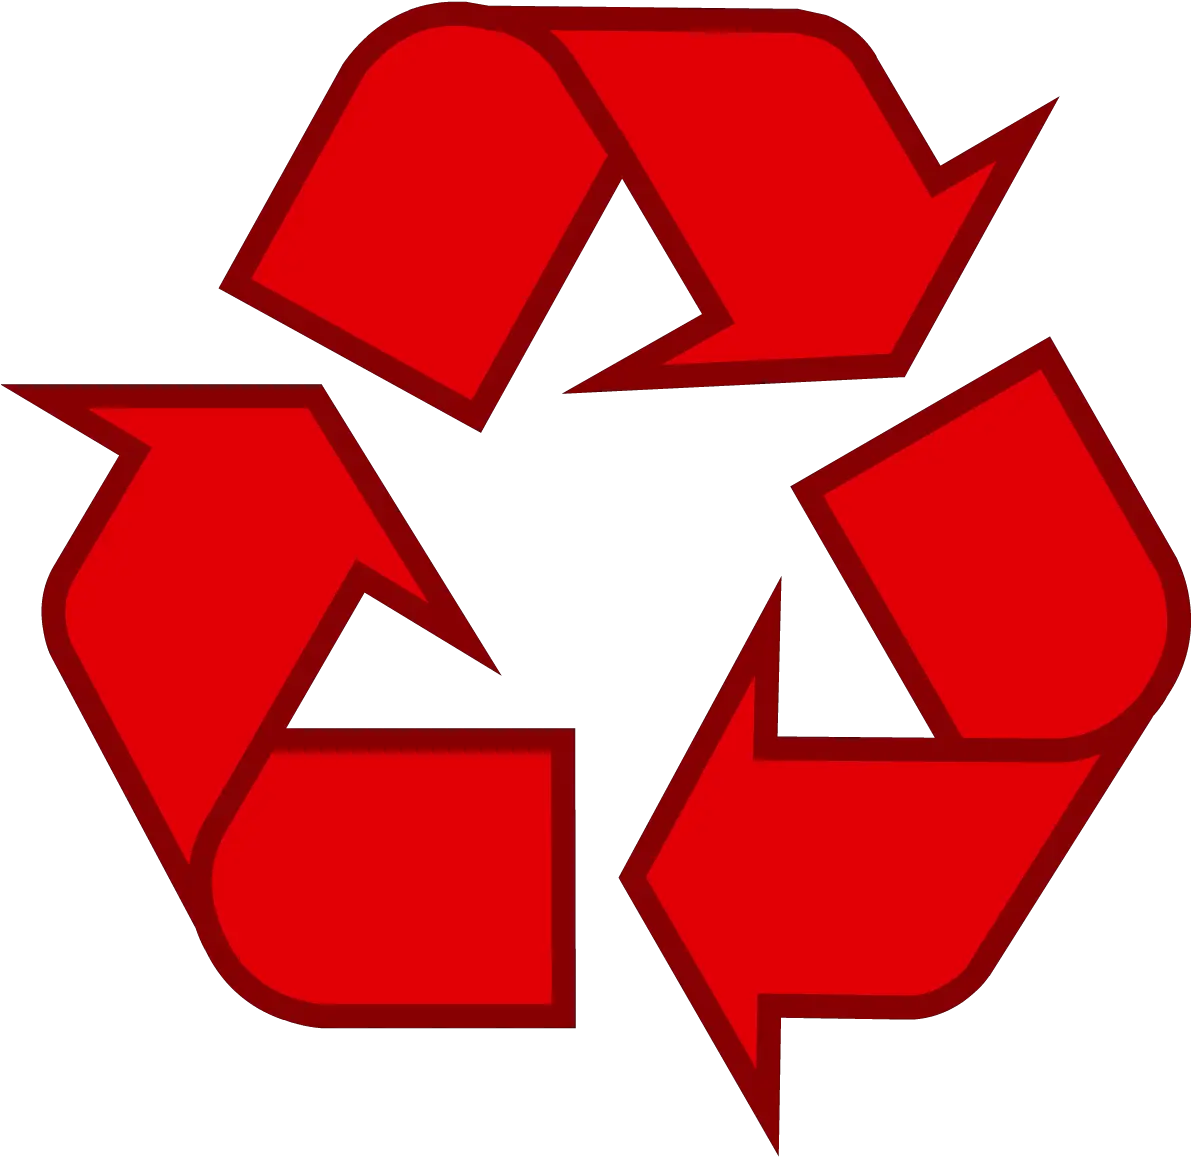 Recycling Symbol Download The Original Recycle Logo Recycling Symbol Transparent Background Png Symbols Png